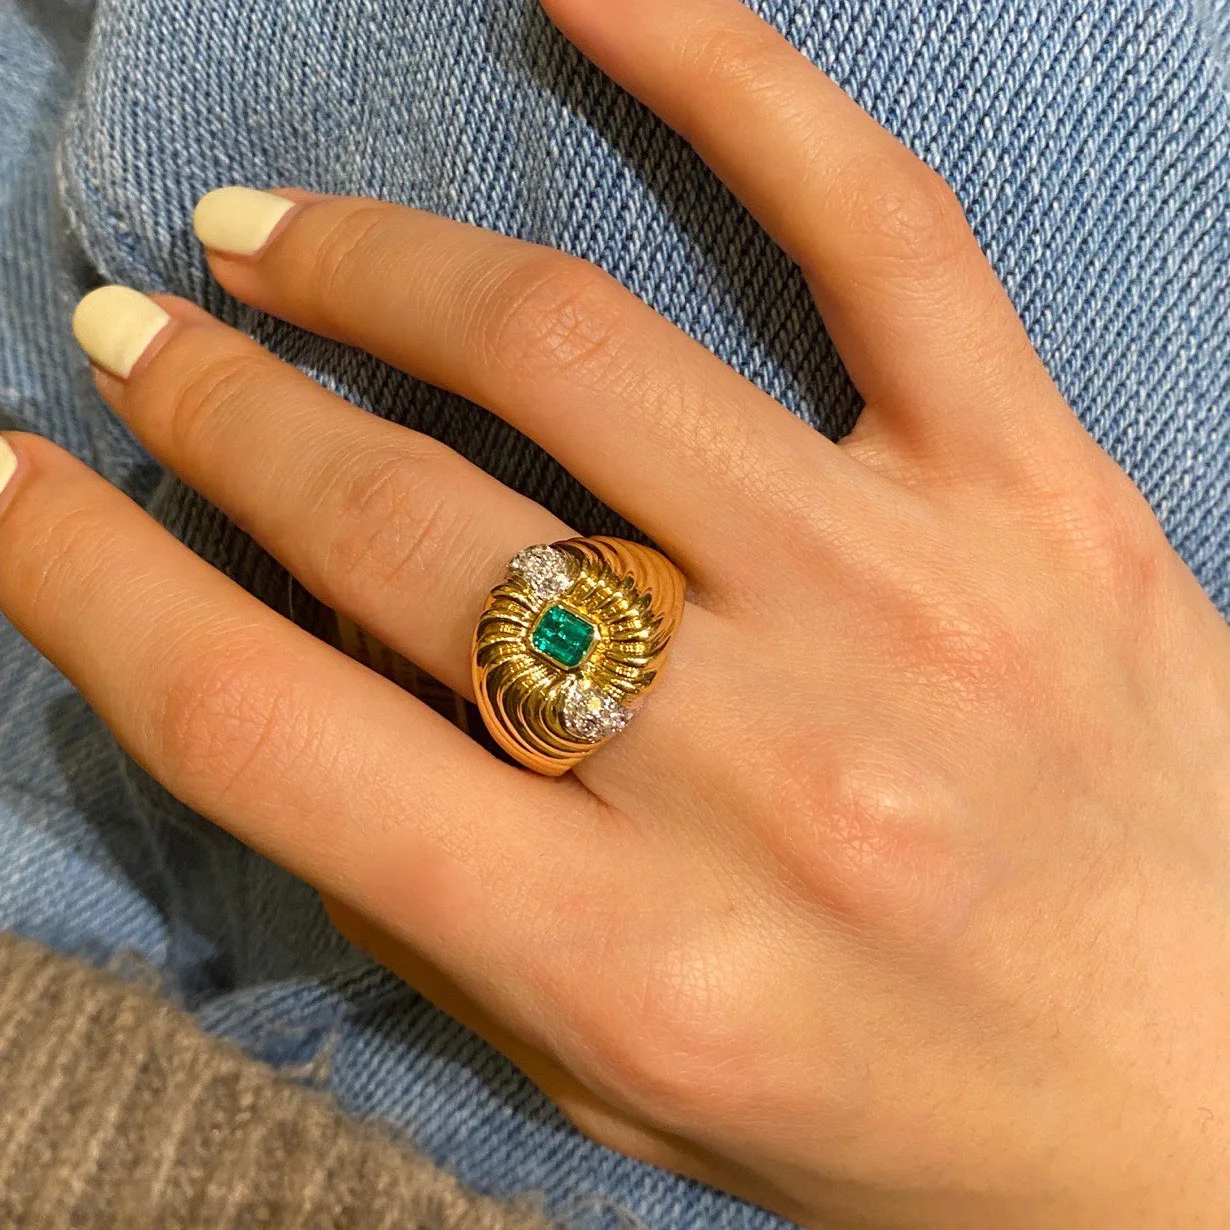 Swarovski Lucent Cocktail Ring in Green | Lyst